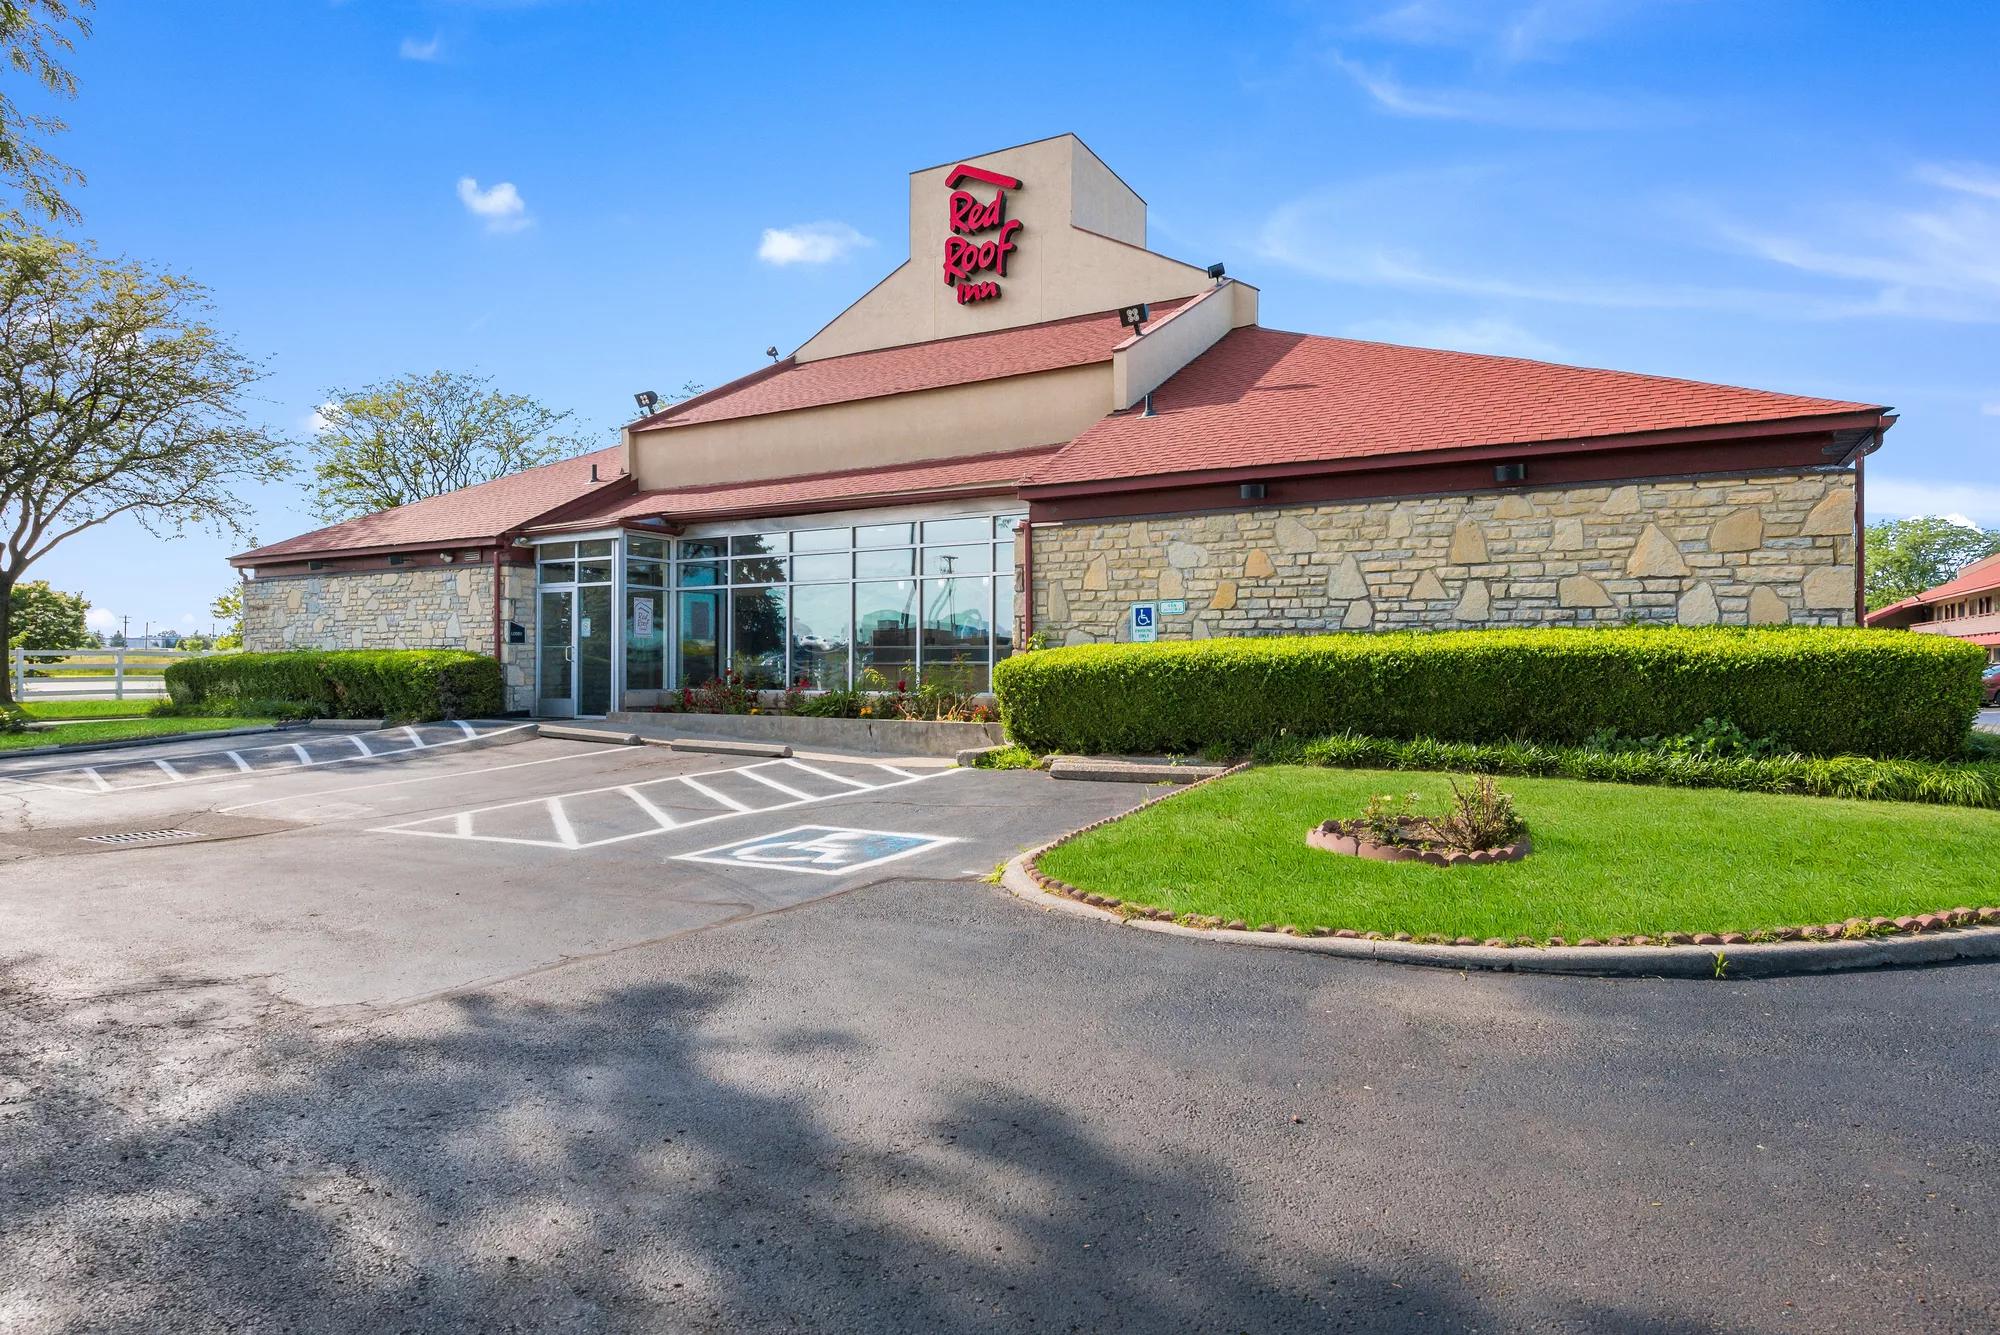 Red Roof Inn Columbus - Grove City Exterior Property Image